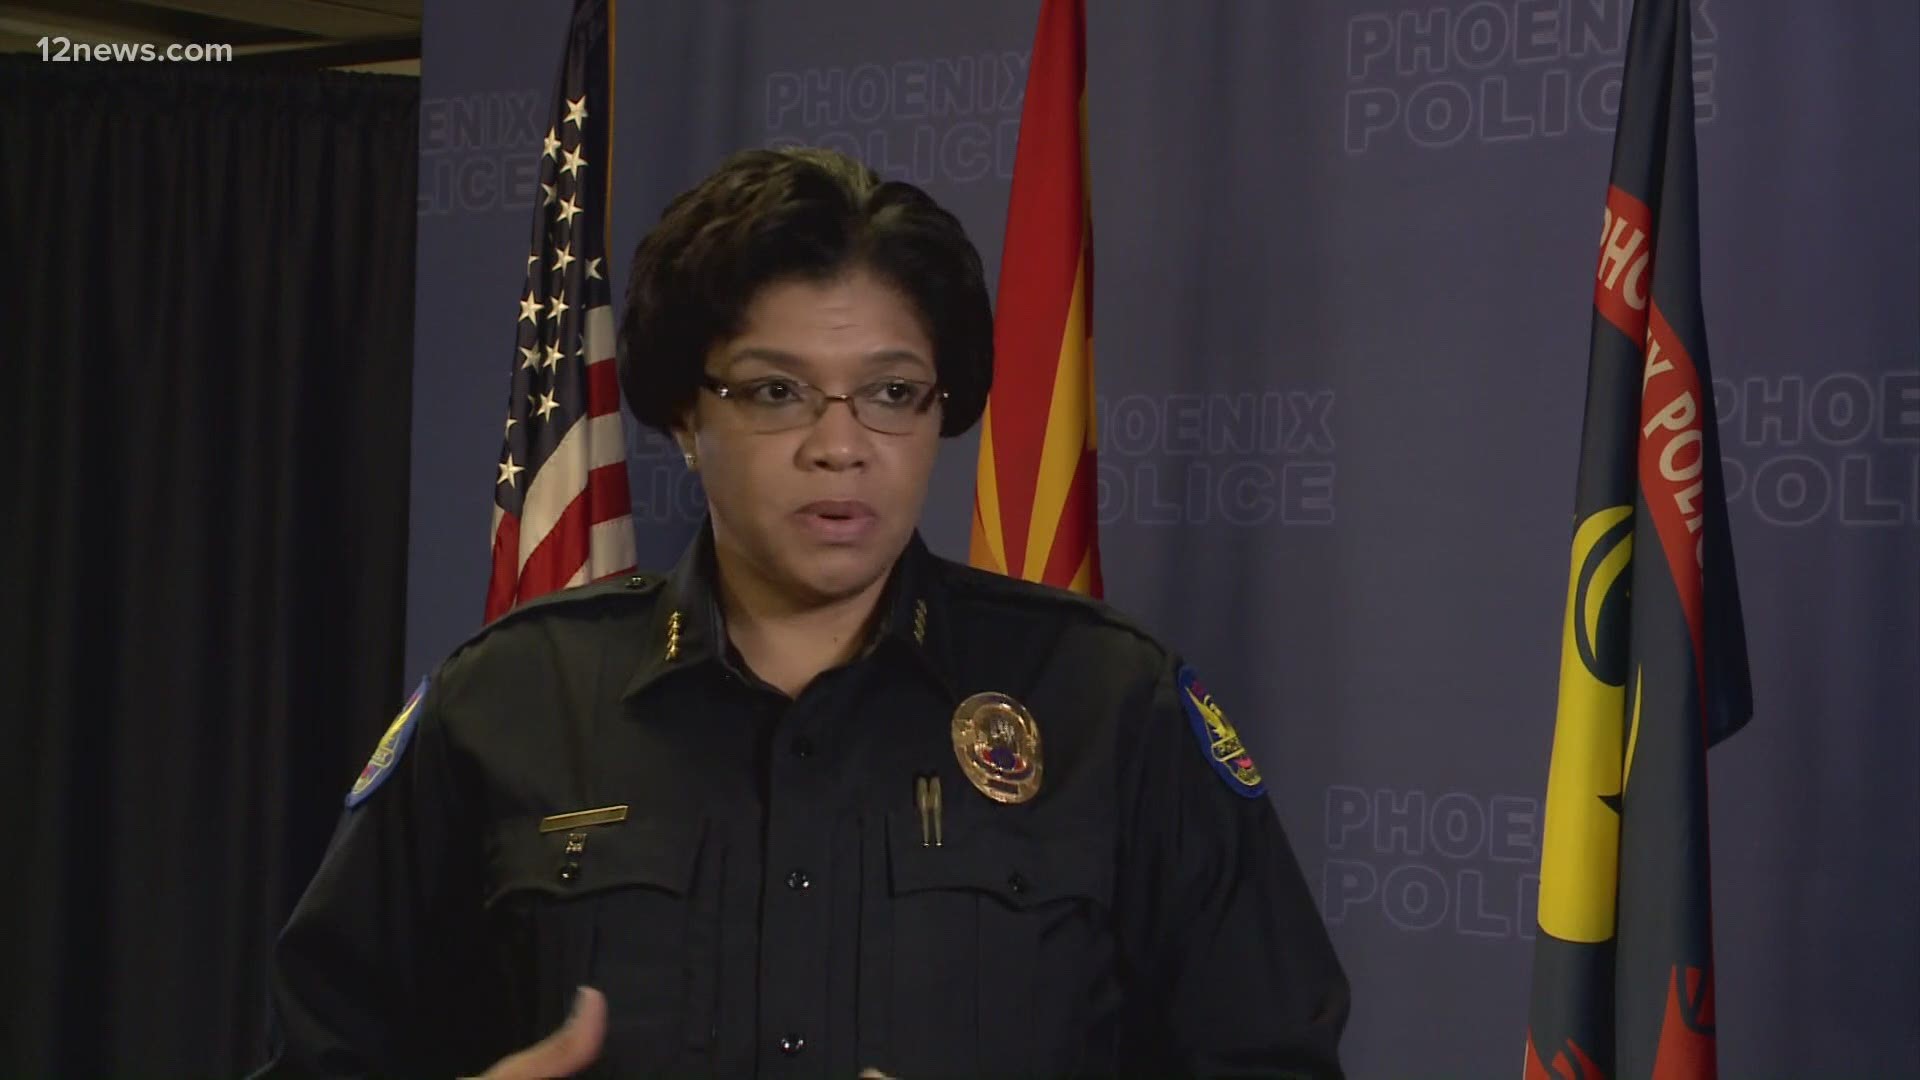 Phoenix Police Chief Jeri Williams is sharing her thoughts on the recent protests. Hear why she says the Arizona curfew is working.